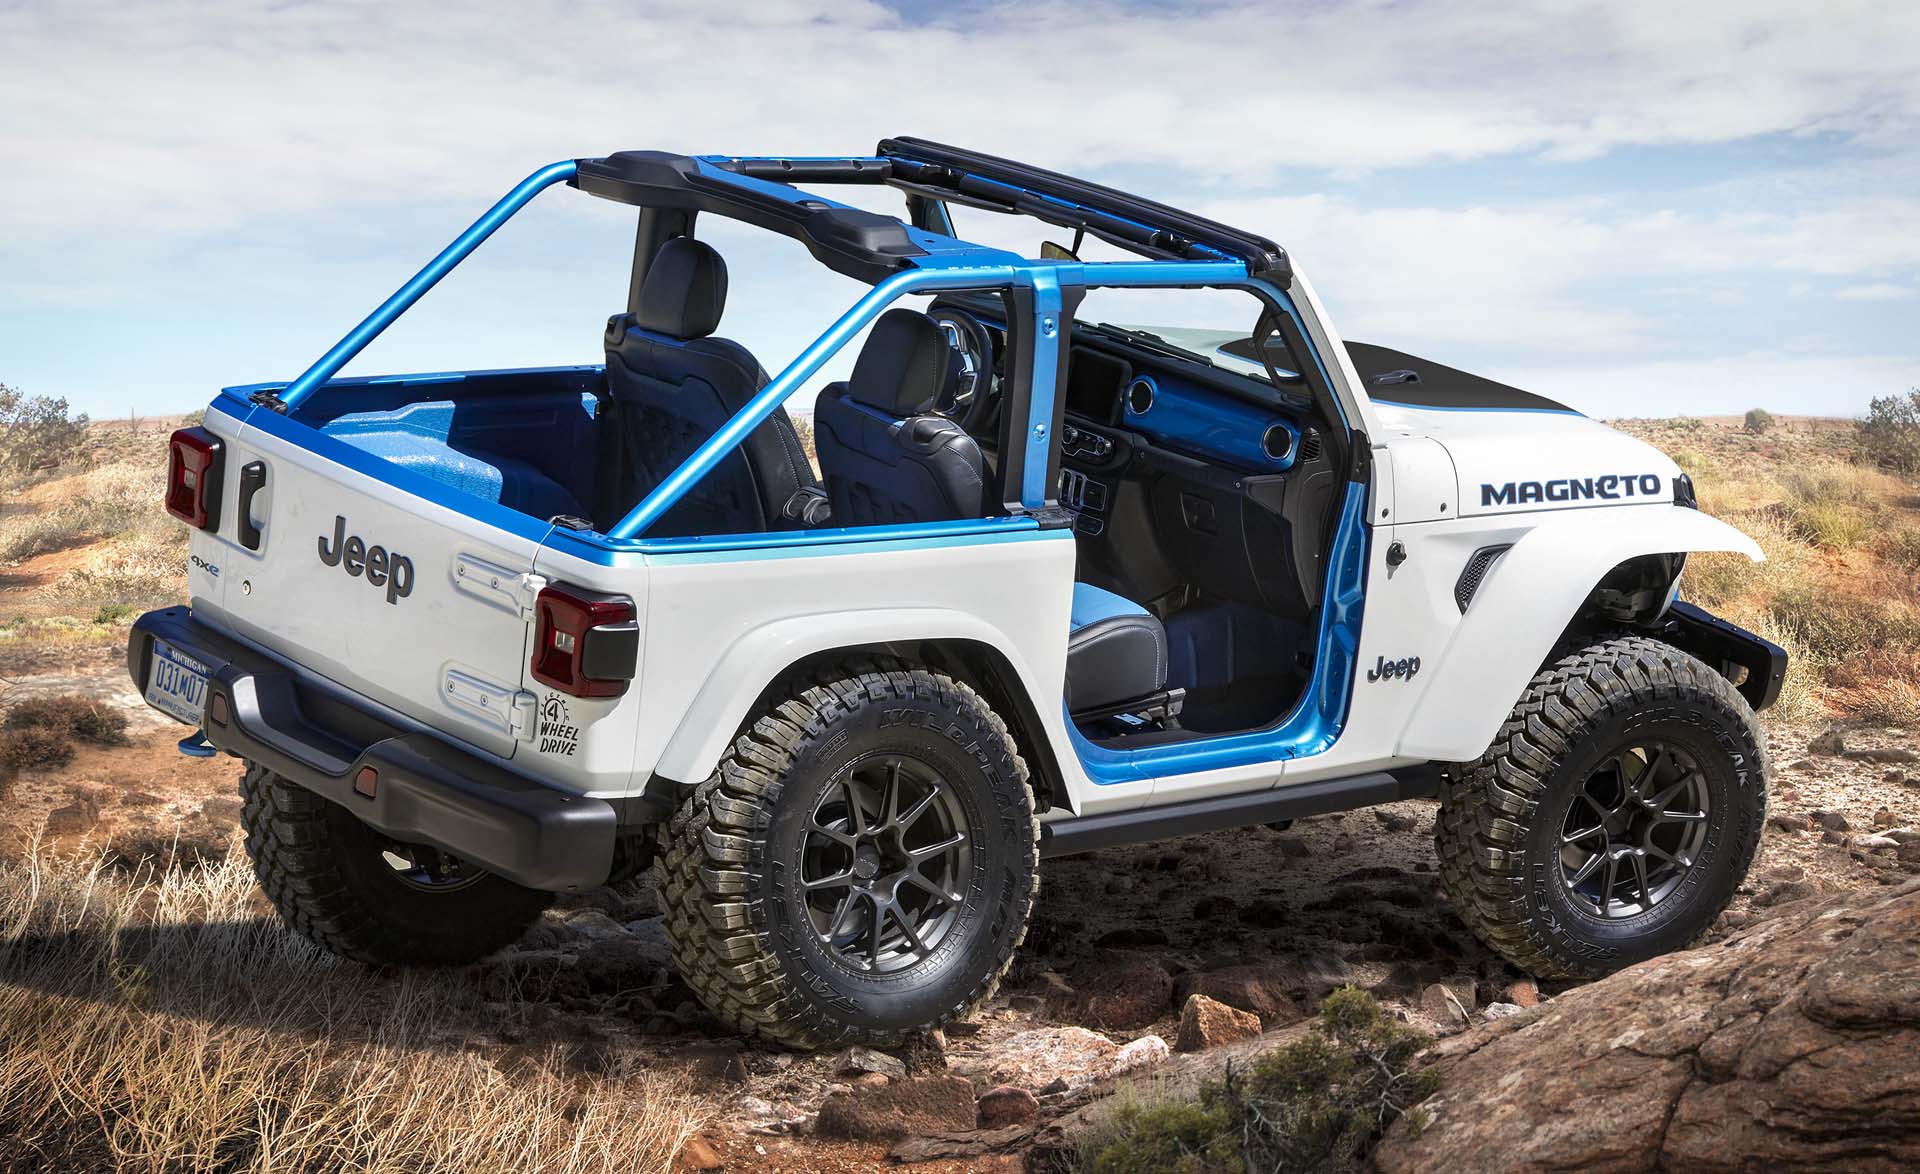 Fully electric Jeep Wrangler concept explores brand’s offroad EV